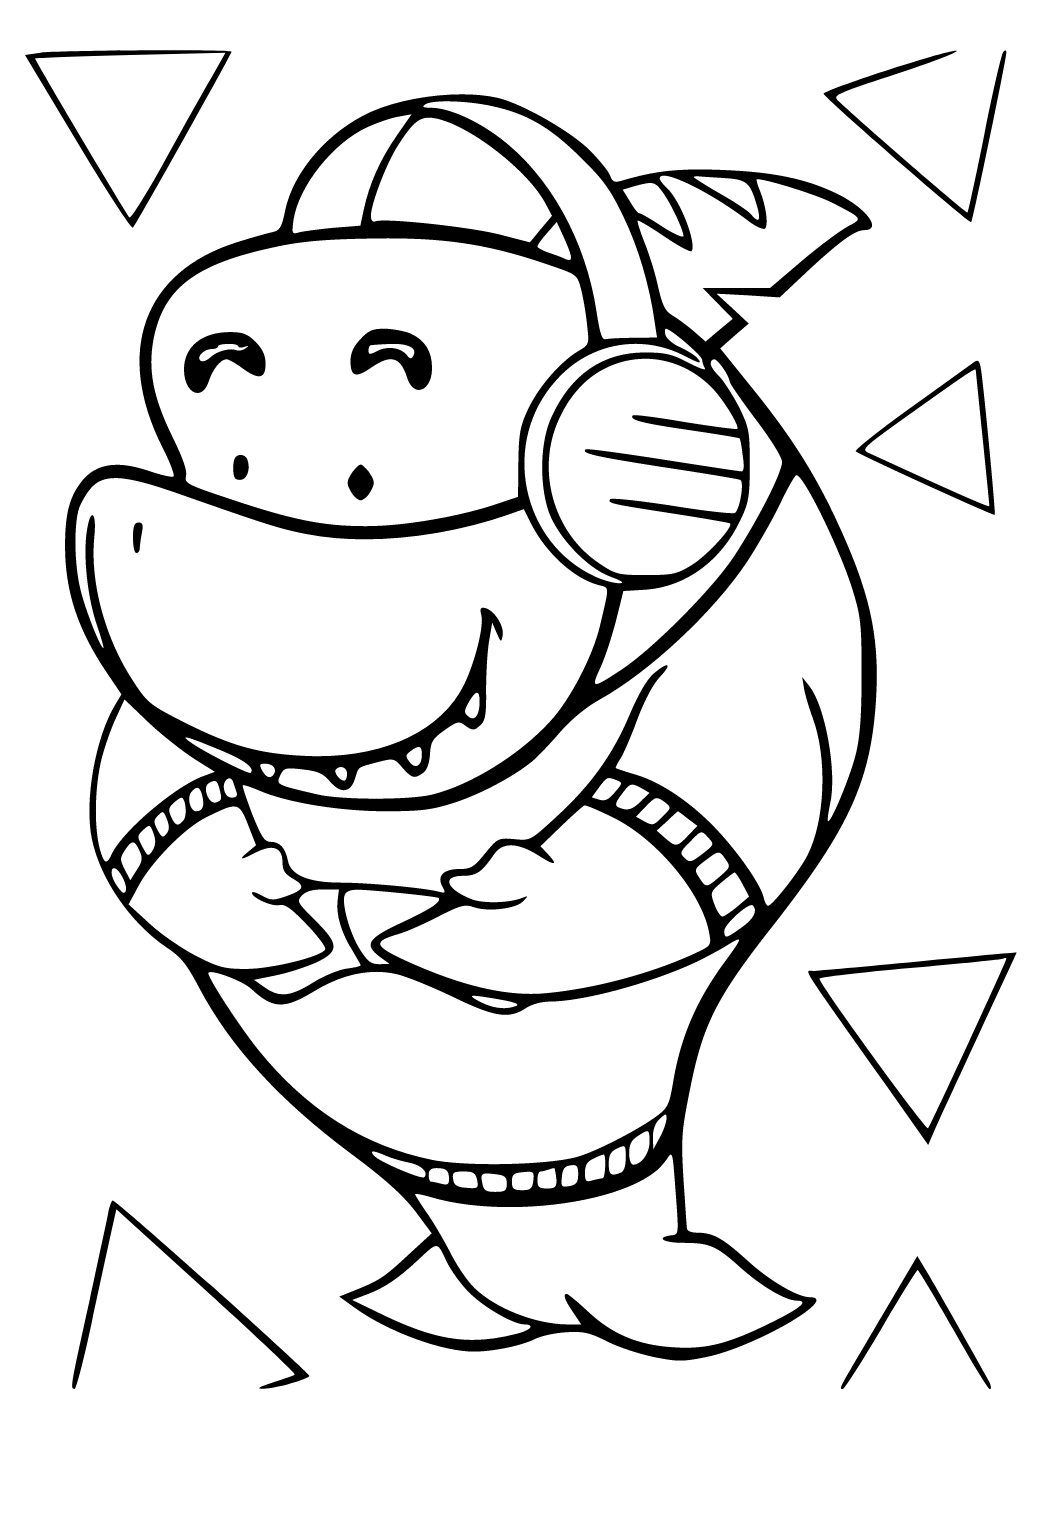 Free printable ryans world shark coloring page sheet and picture for adults and kids girls and boys